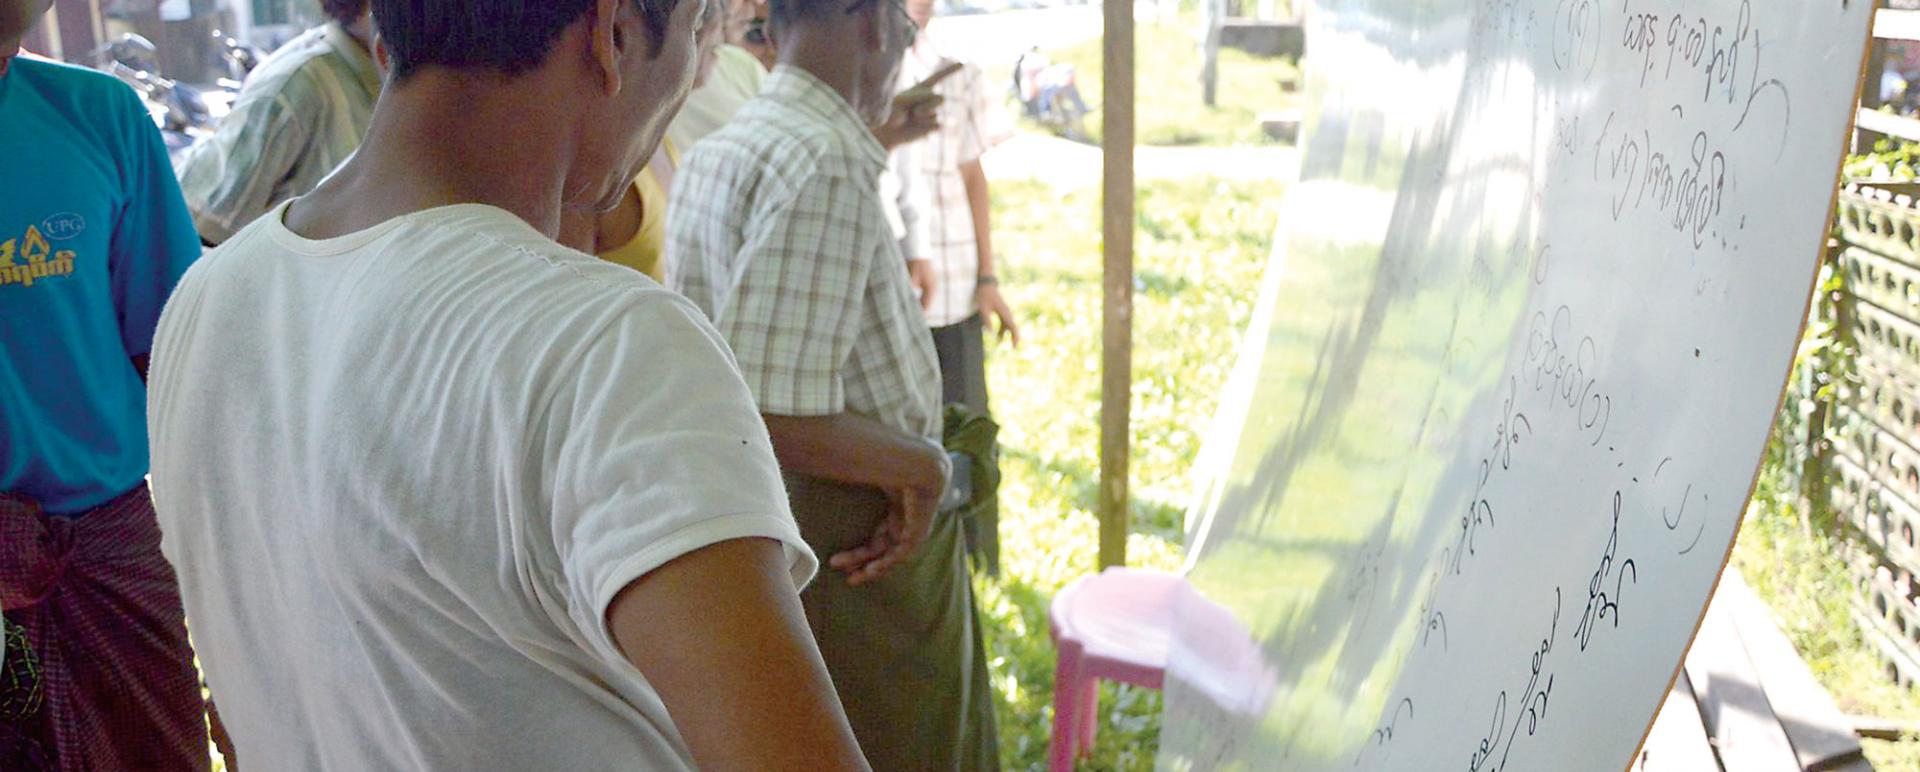 Sittwe residents observe the results of General Election 2015